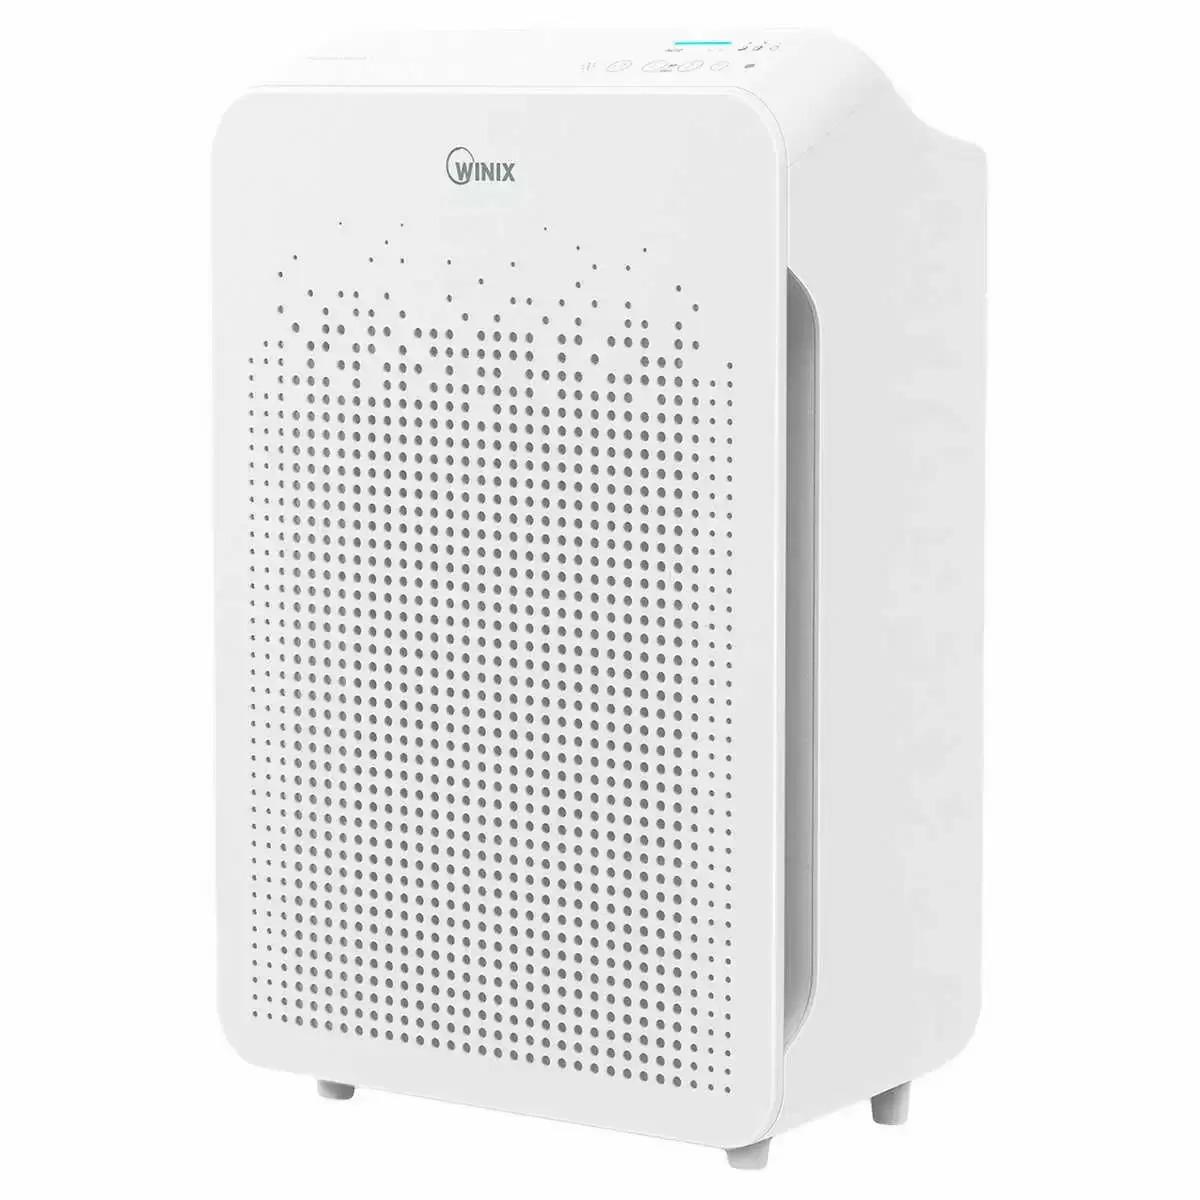 Winix C545 4-Stage Air Purifier with WiFi for $69.99